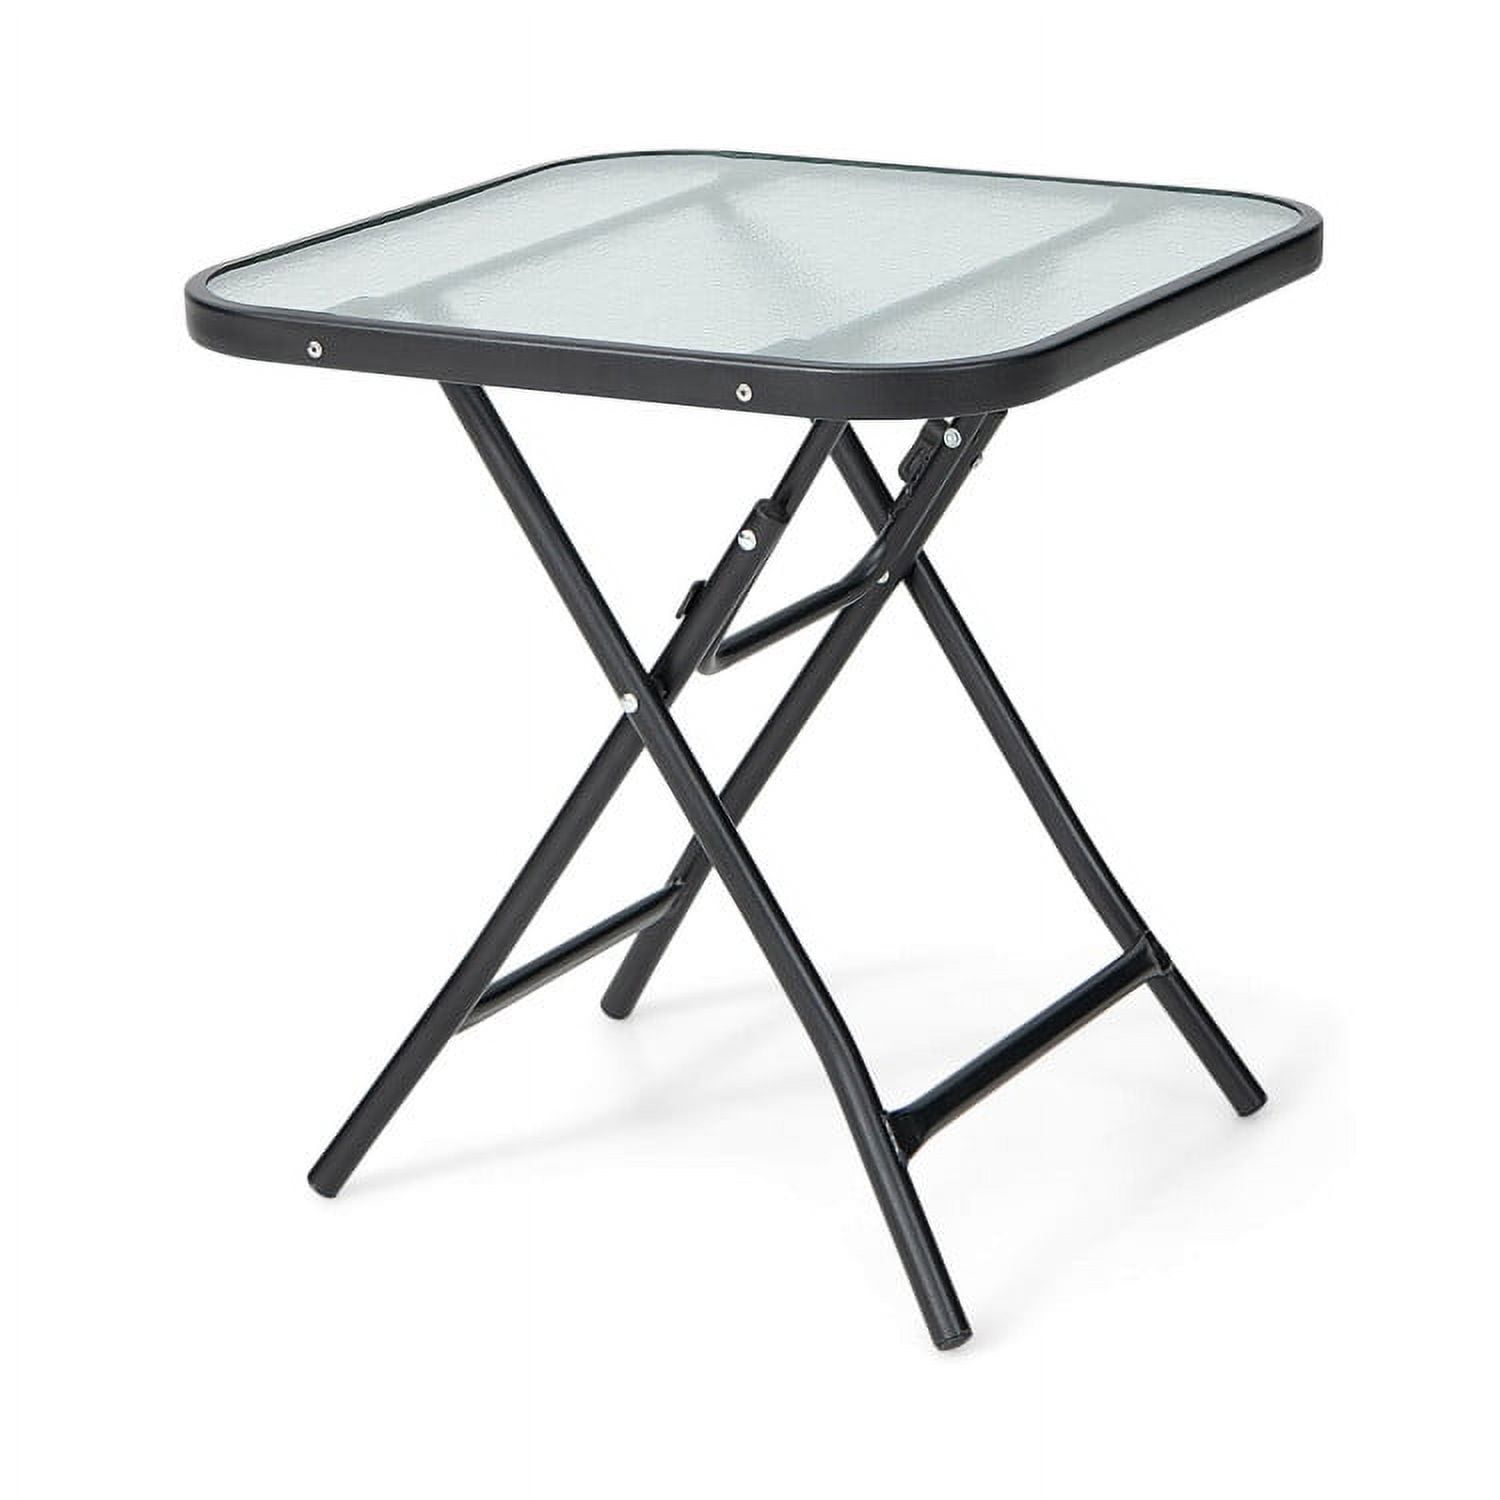 Aimee Lii 18" Square Patio Bistro Table with Rustproof Frame, Outdoor Patio Furniture